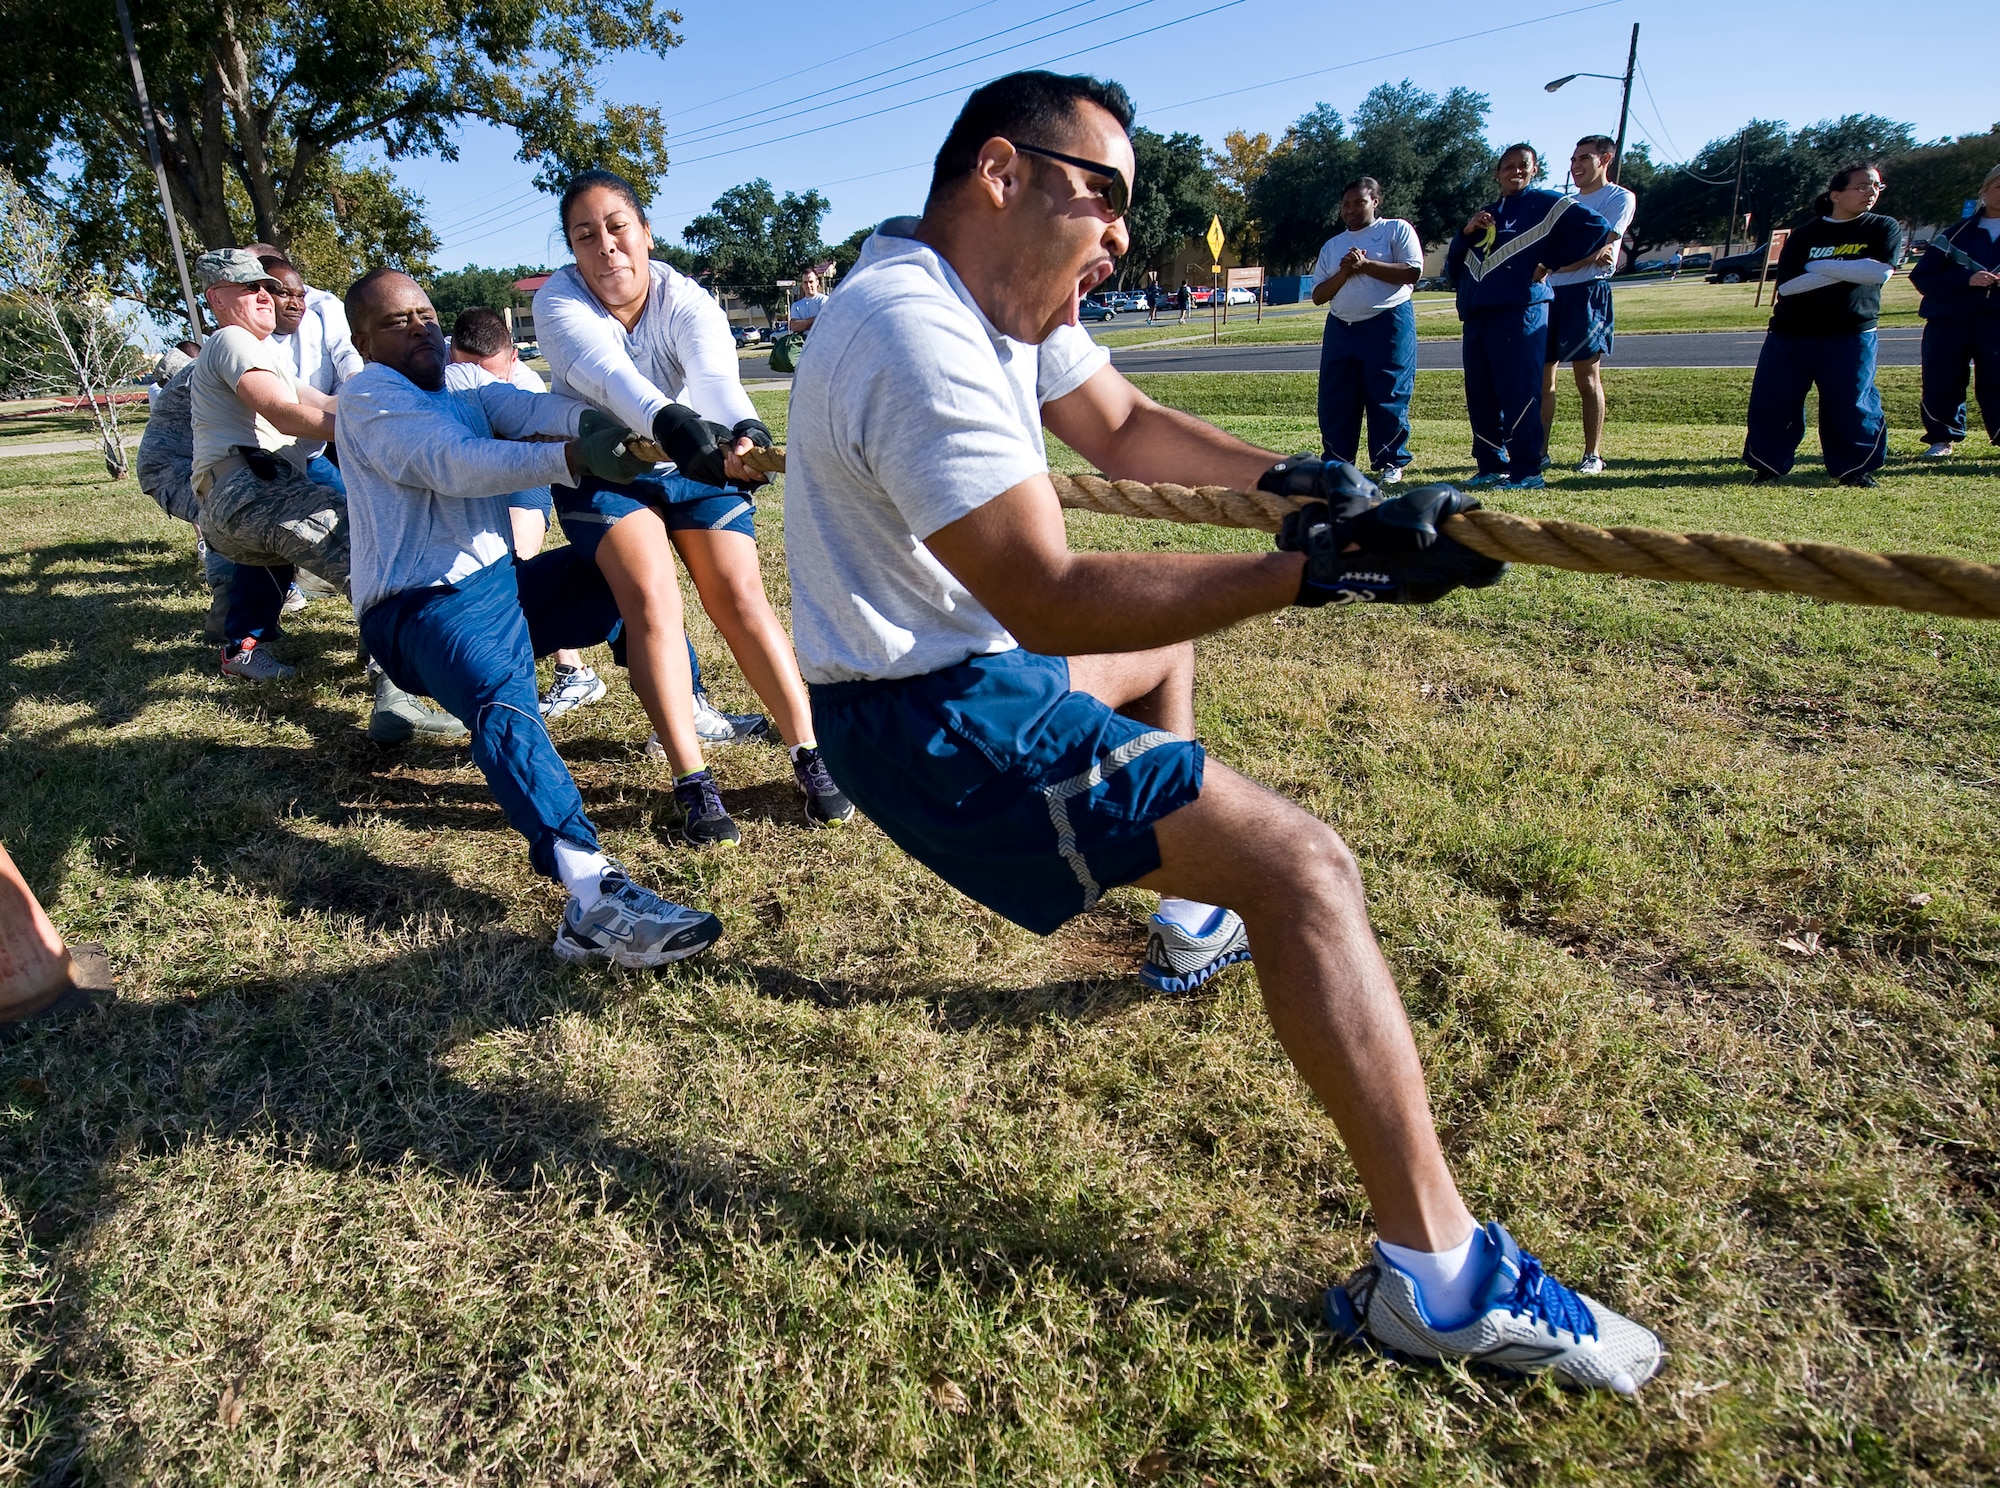 Airmen from the 2nd Communications Squadron compete in a tug-of-war match during the 2012 Sports Day on Barksdale Air Force Base, La., Nov. 16. This annual event gives Airmen the opportunity to participate in several individual and team sports throughout the day boosting team morale. (U.S. Air Force photo/Staff Sgt. Chad Warren)(RELEASED)